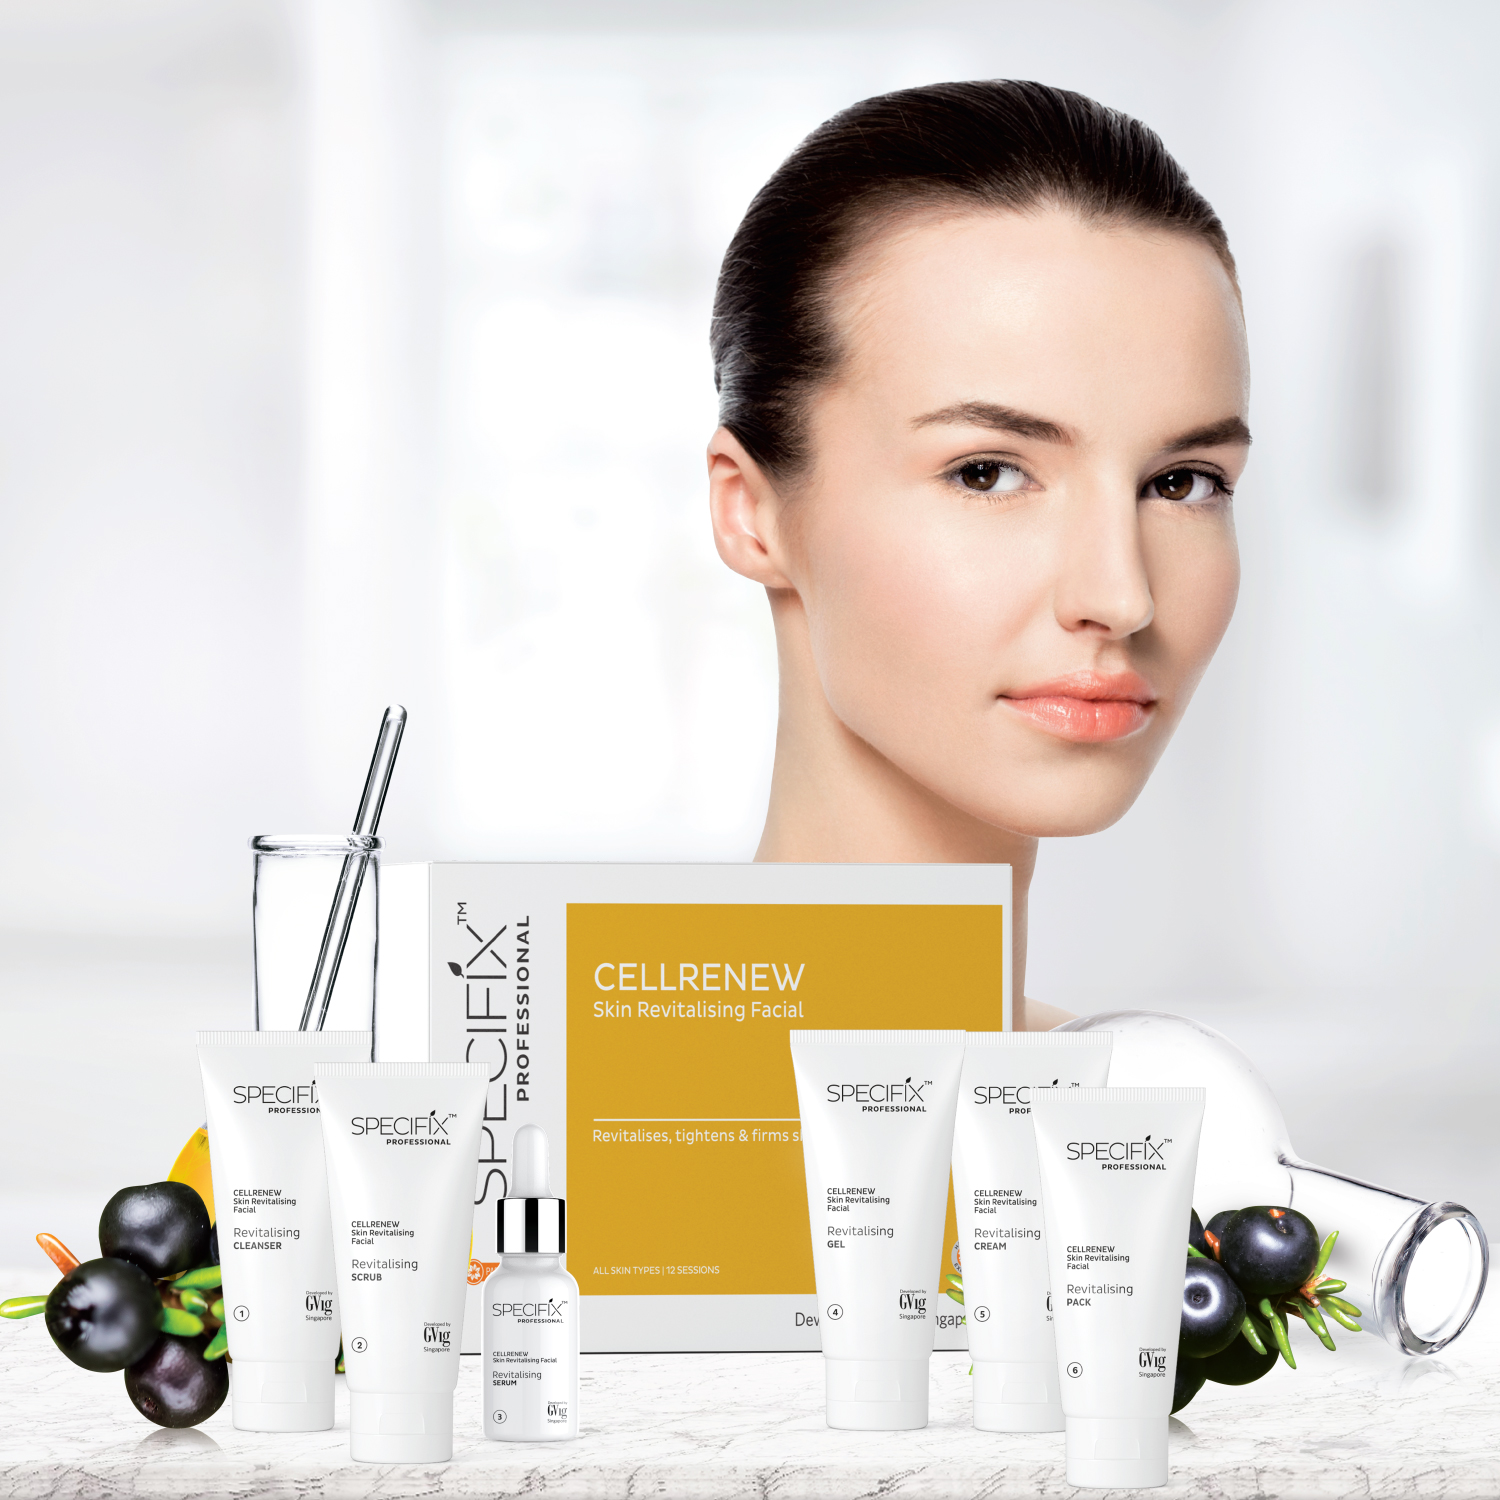 All-in-1 Youth Activating Treatment: SPECIFIX™ Cellrenew Skin Revitalising Facial